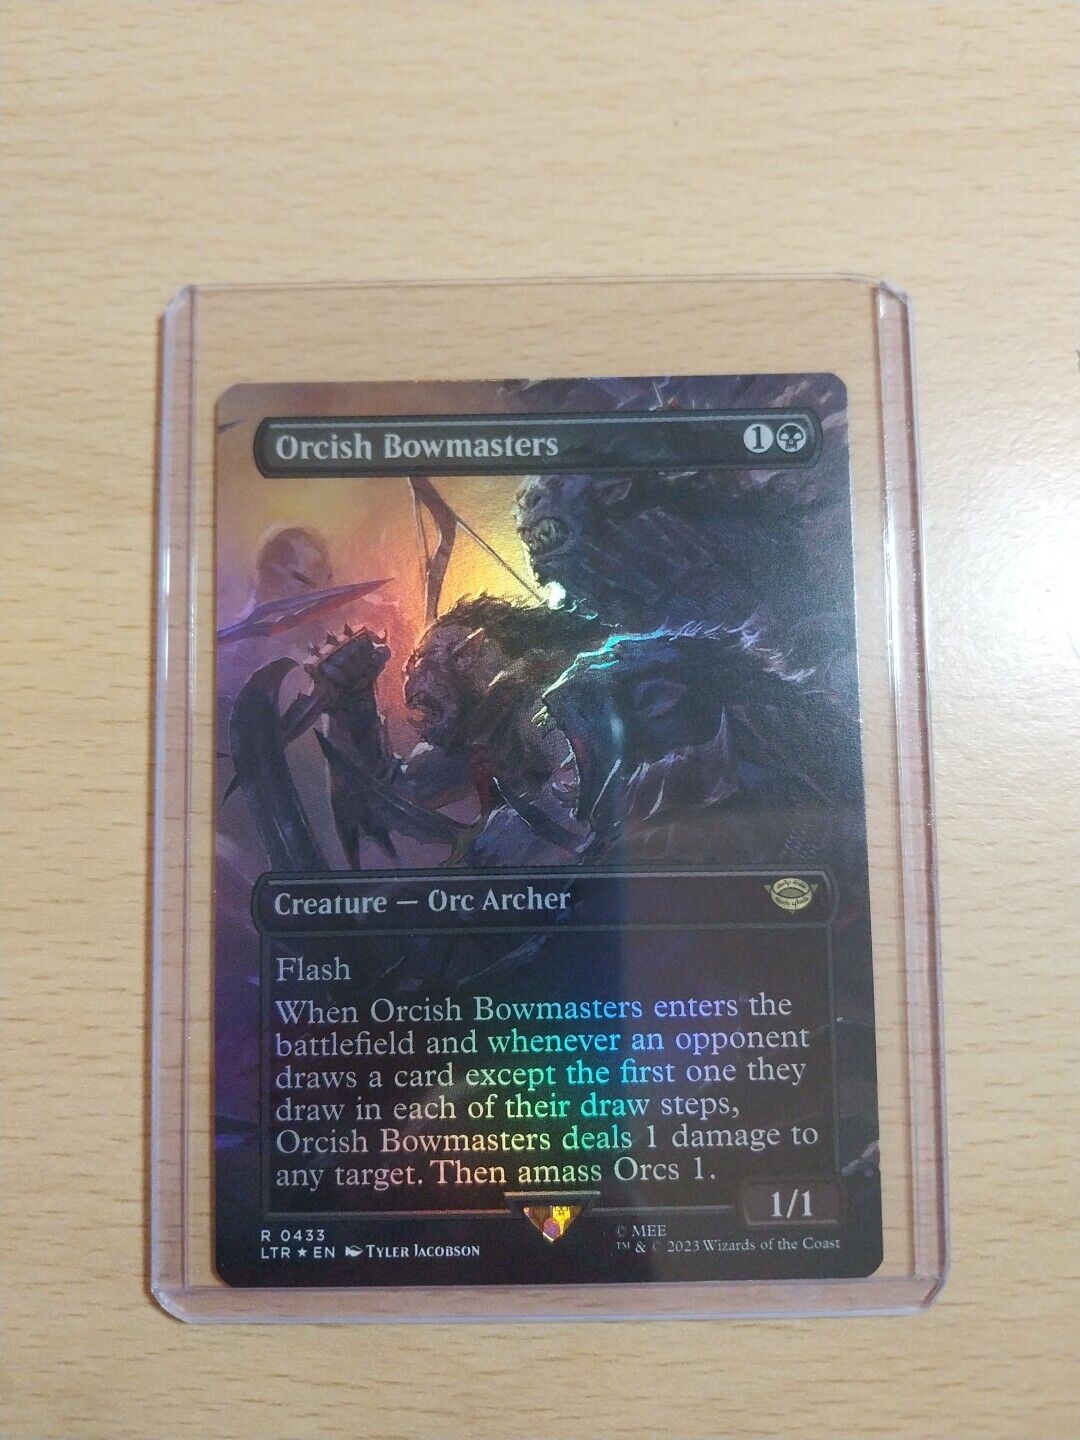 Orcish Bowmasters Foil Rare, Lord of the Rings #433, MTG Magic The Gathering 